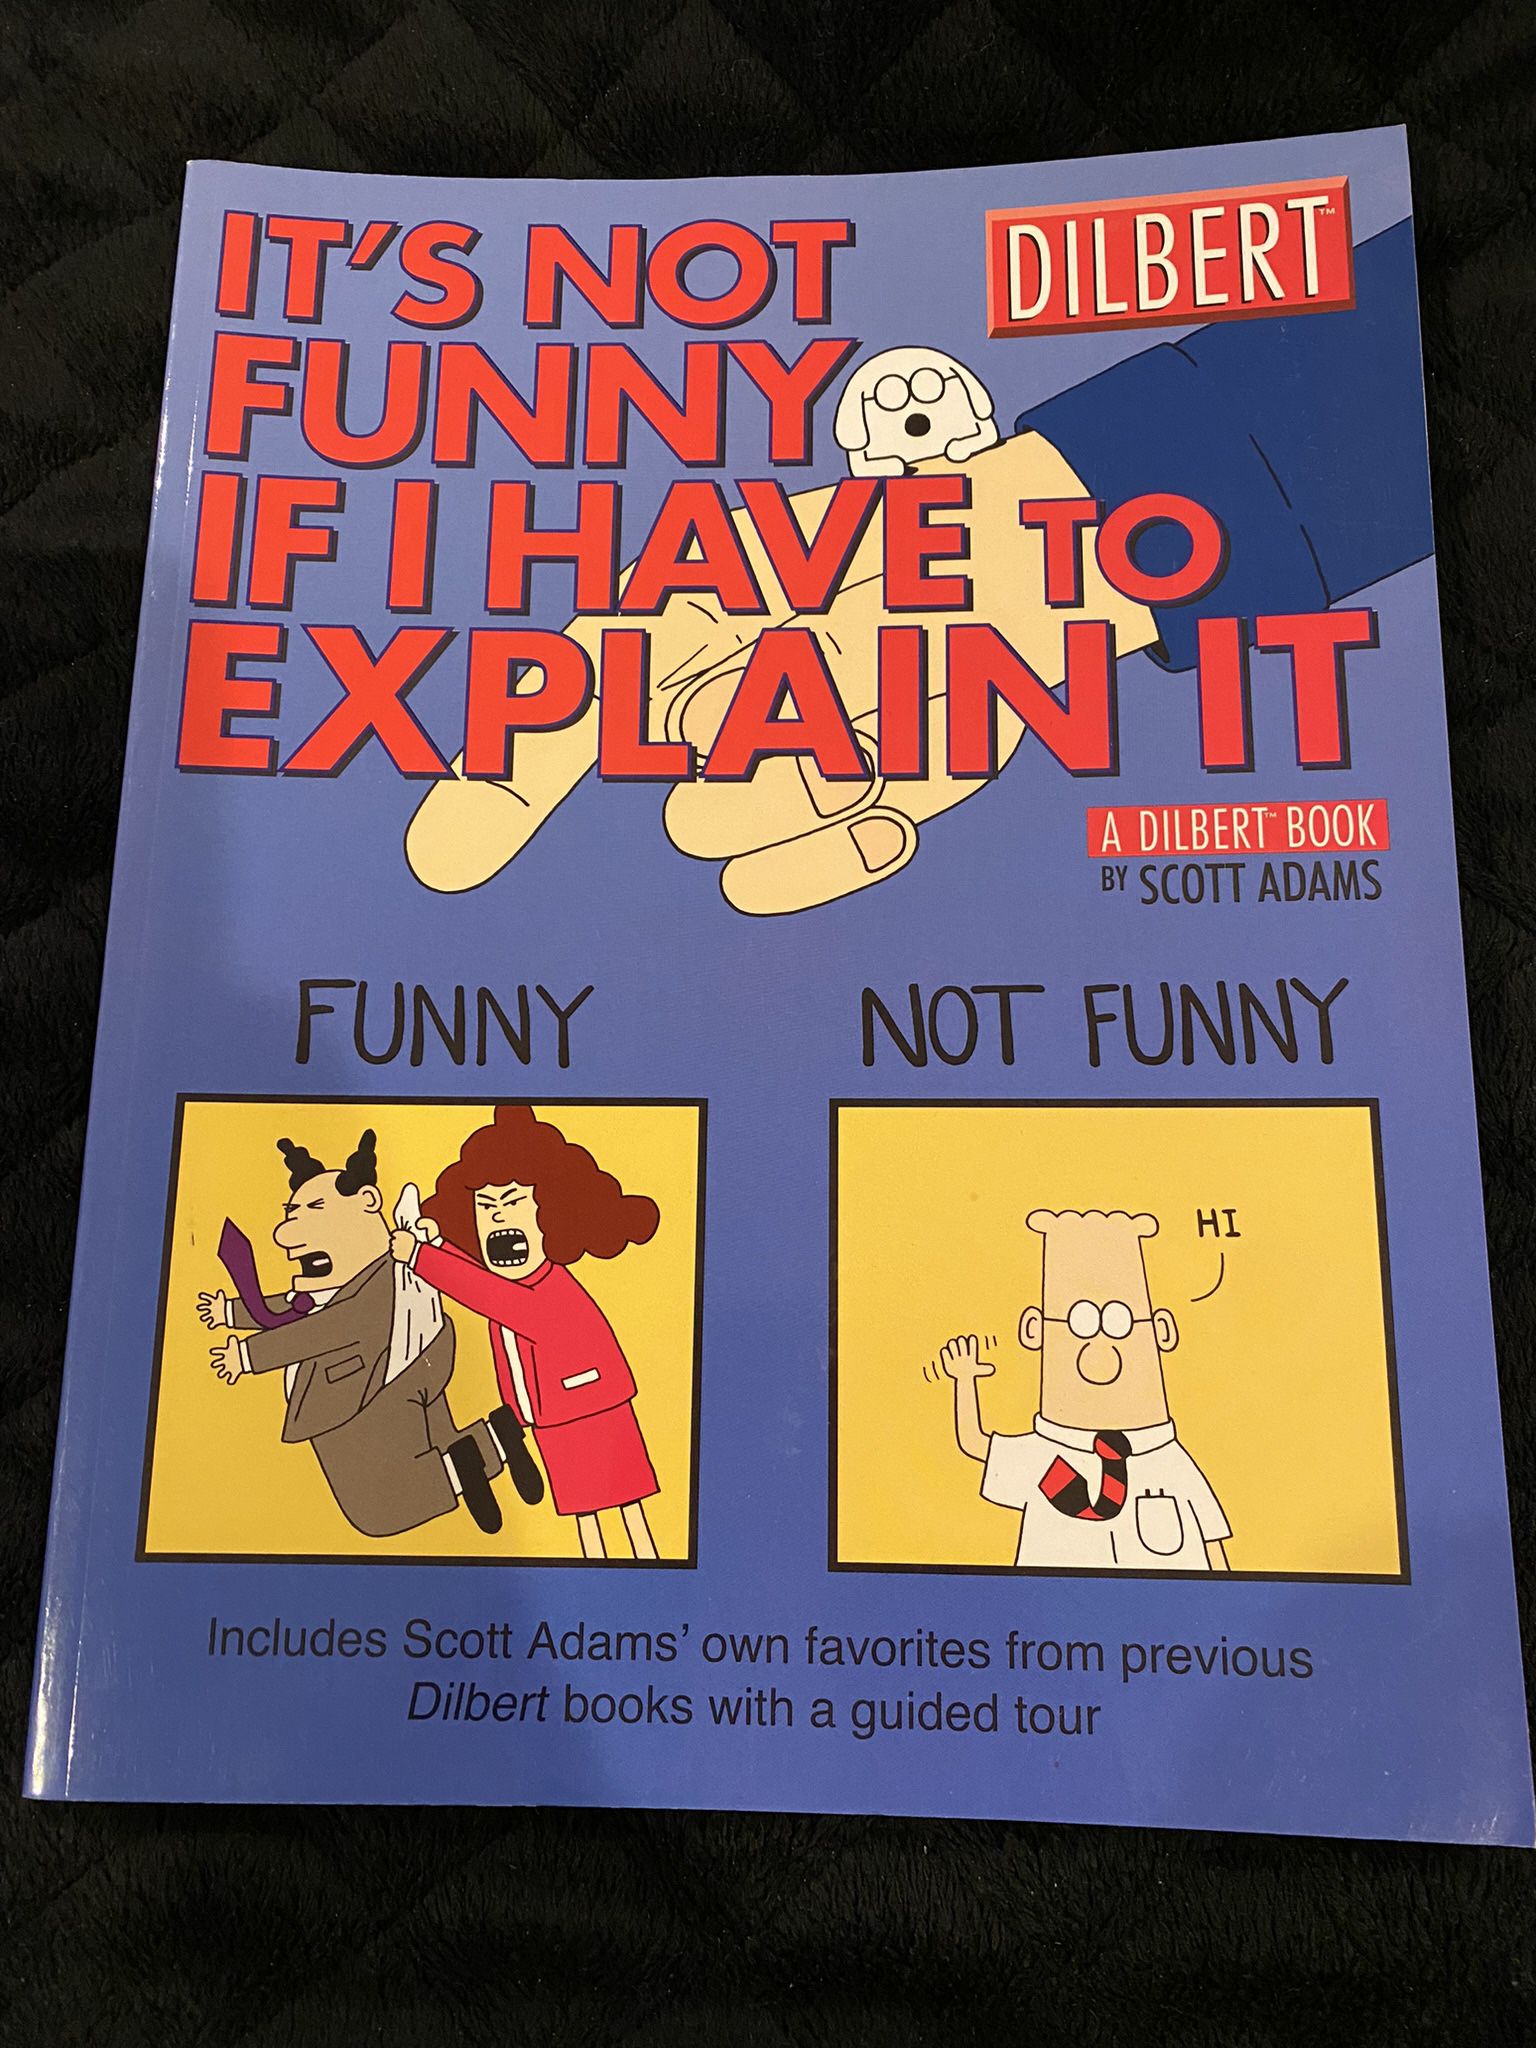 NEW paperback: Dilbert - It's Not Funny If I Have to Explain It